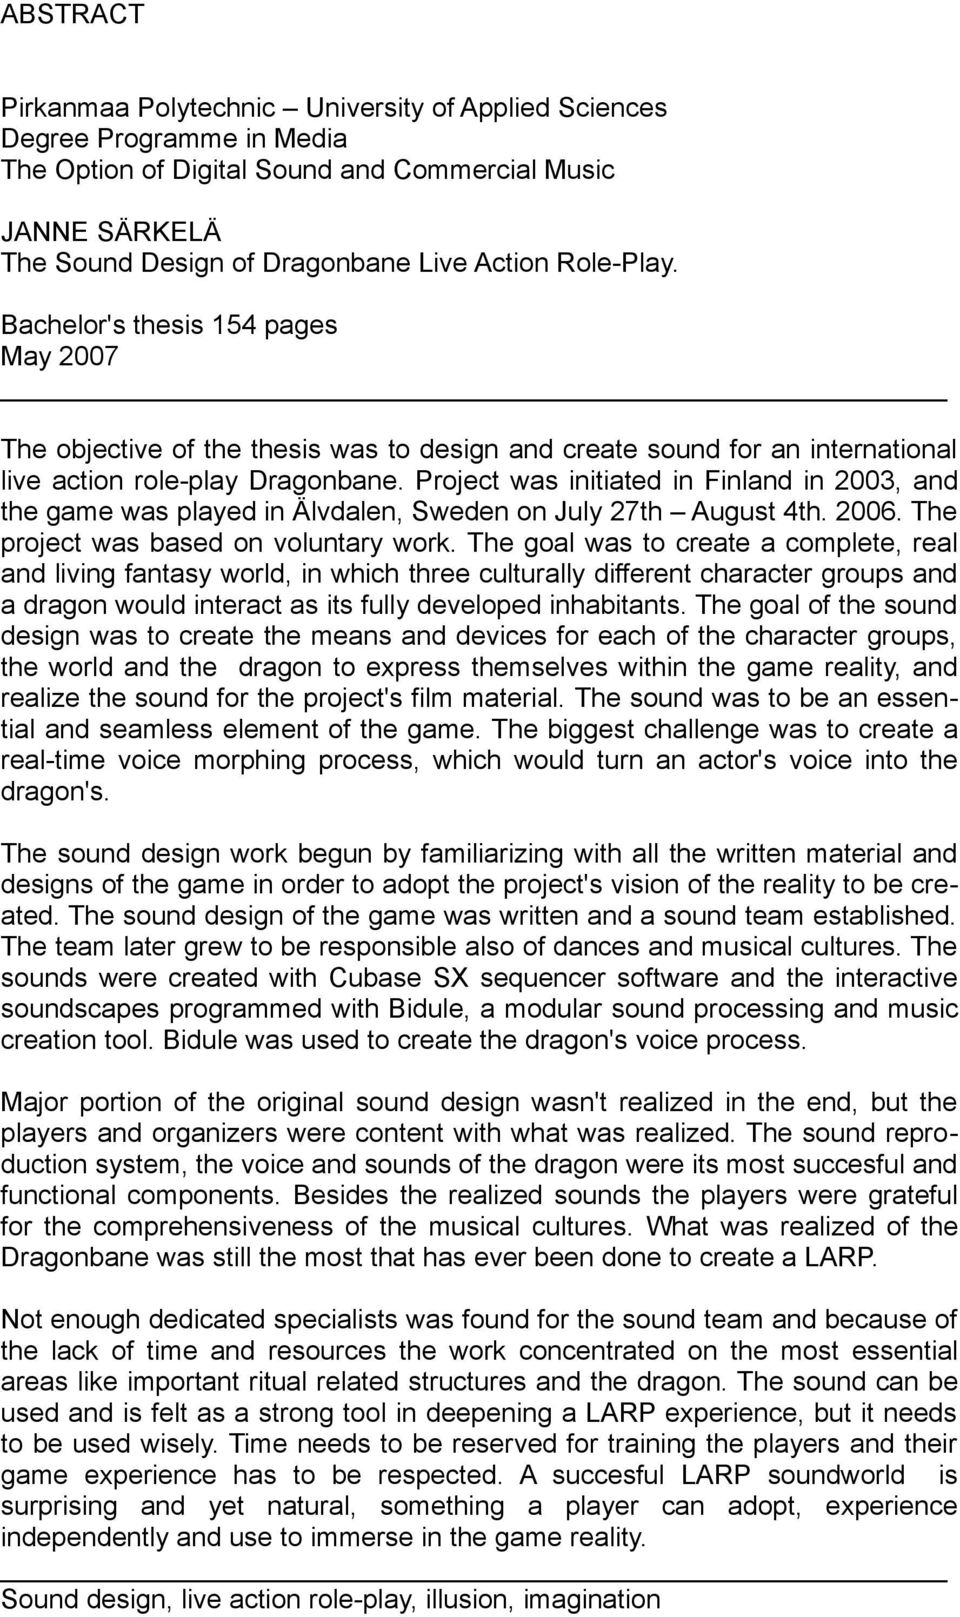 Project was initiated in Finland in 2003, and the game was played in Älvdalen, Sweden on July 27th August 4th. 2006. The project was based on voluntary work.